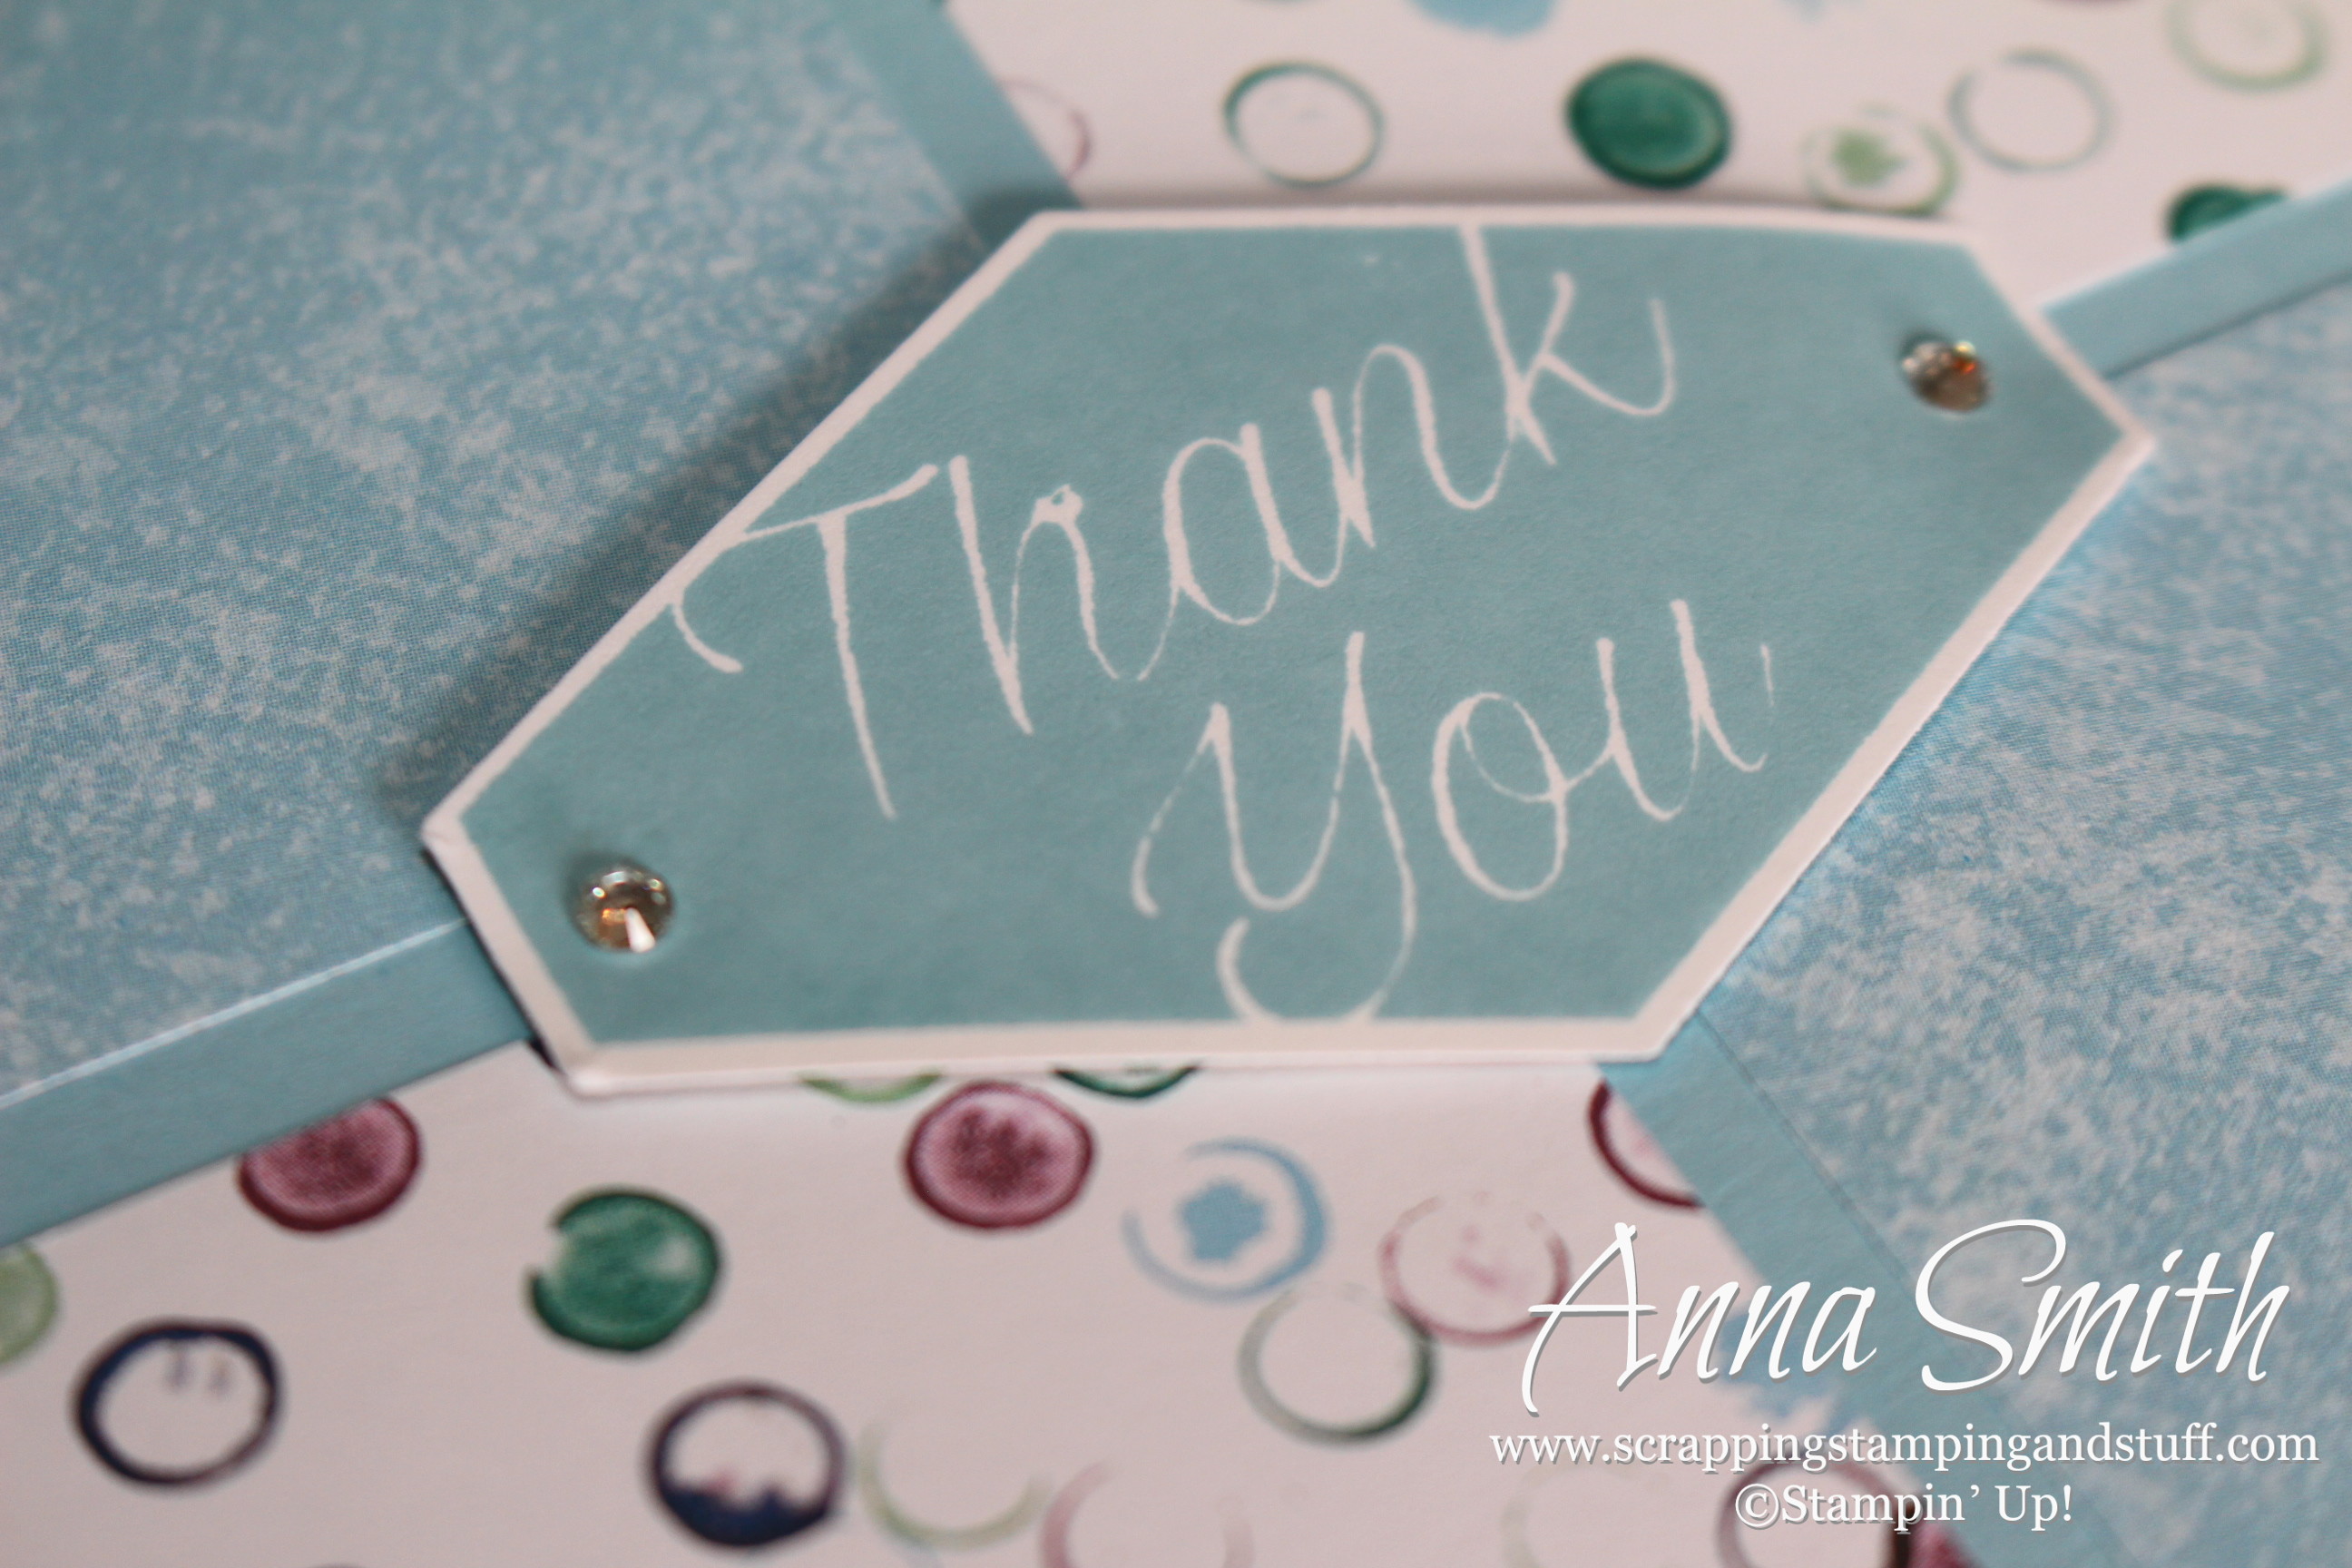 A Stampin’ Up! Tailored Tag Thank You Note